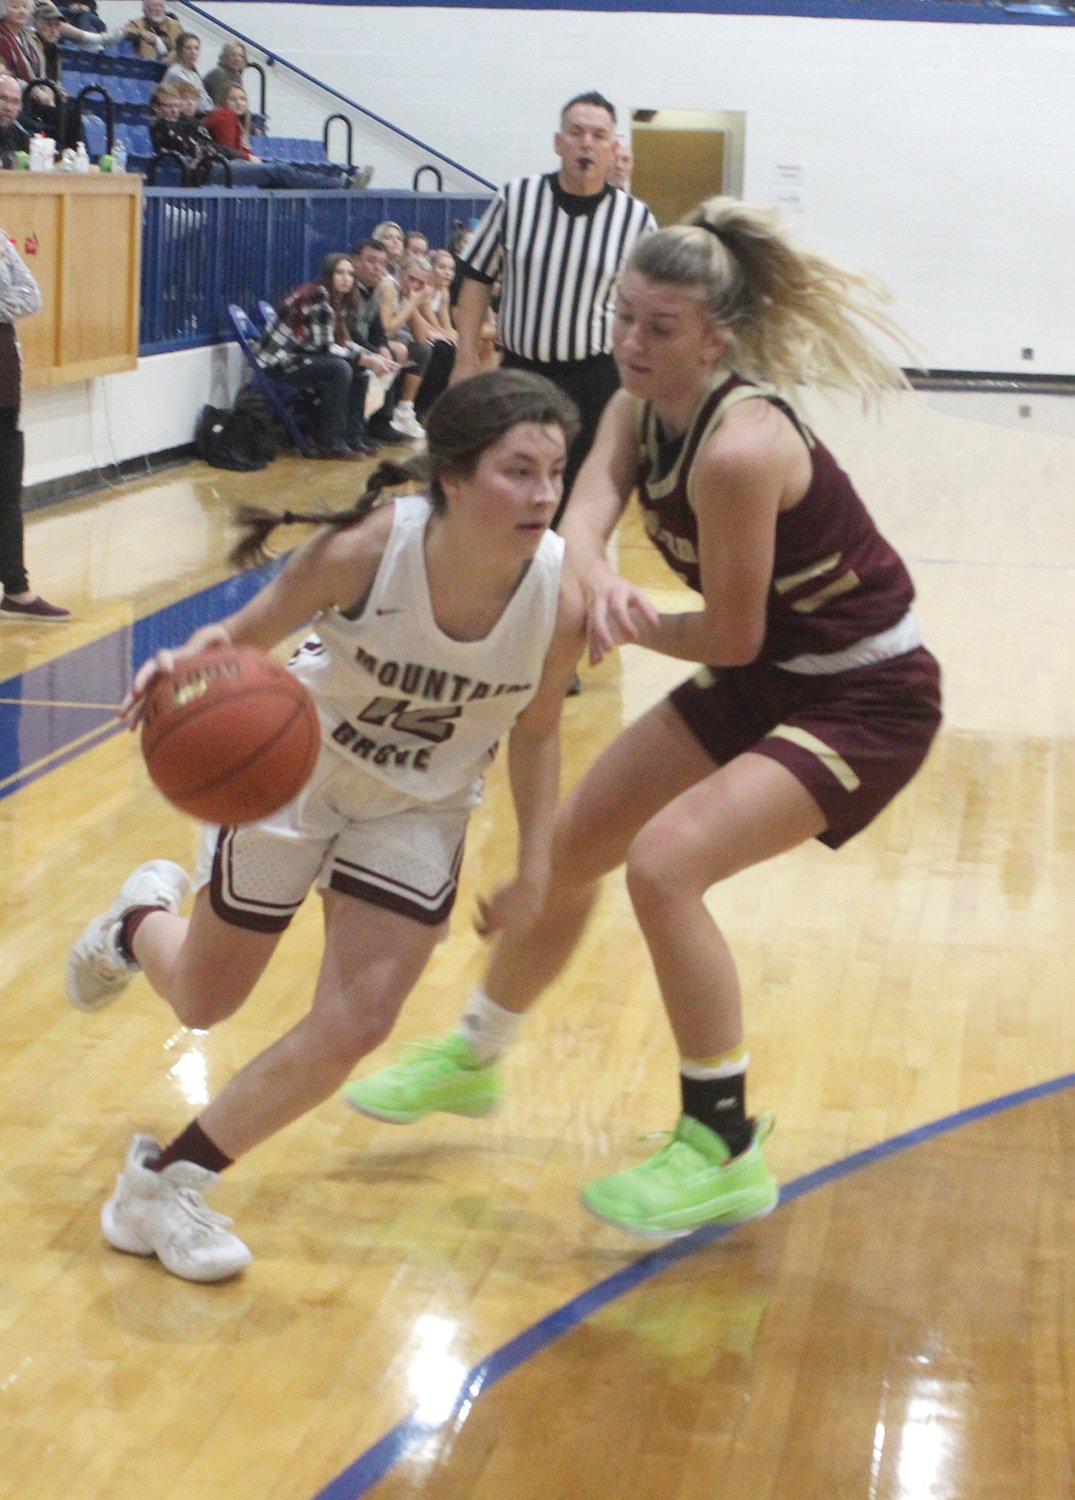 Mountain Grove’s Addy Welch takes her dribble around a Spokane defender.